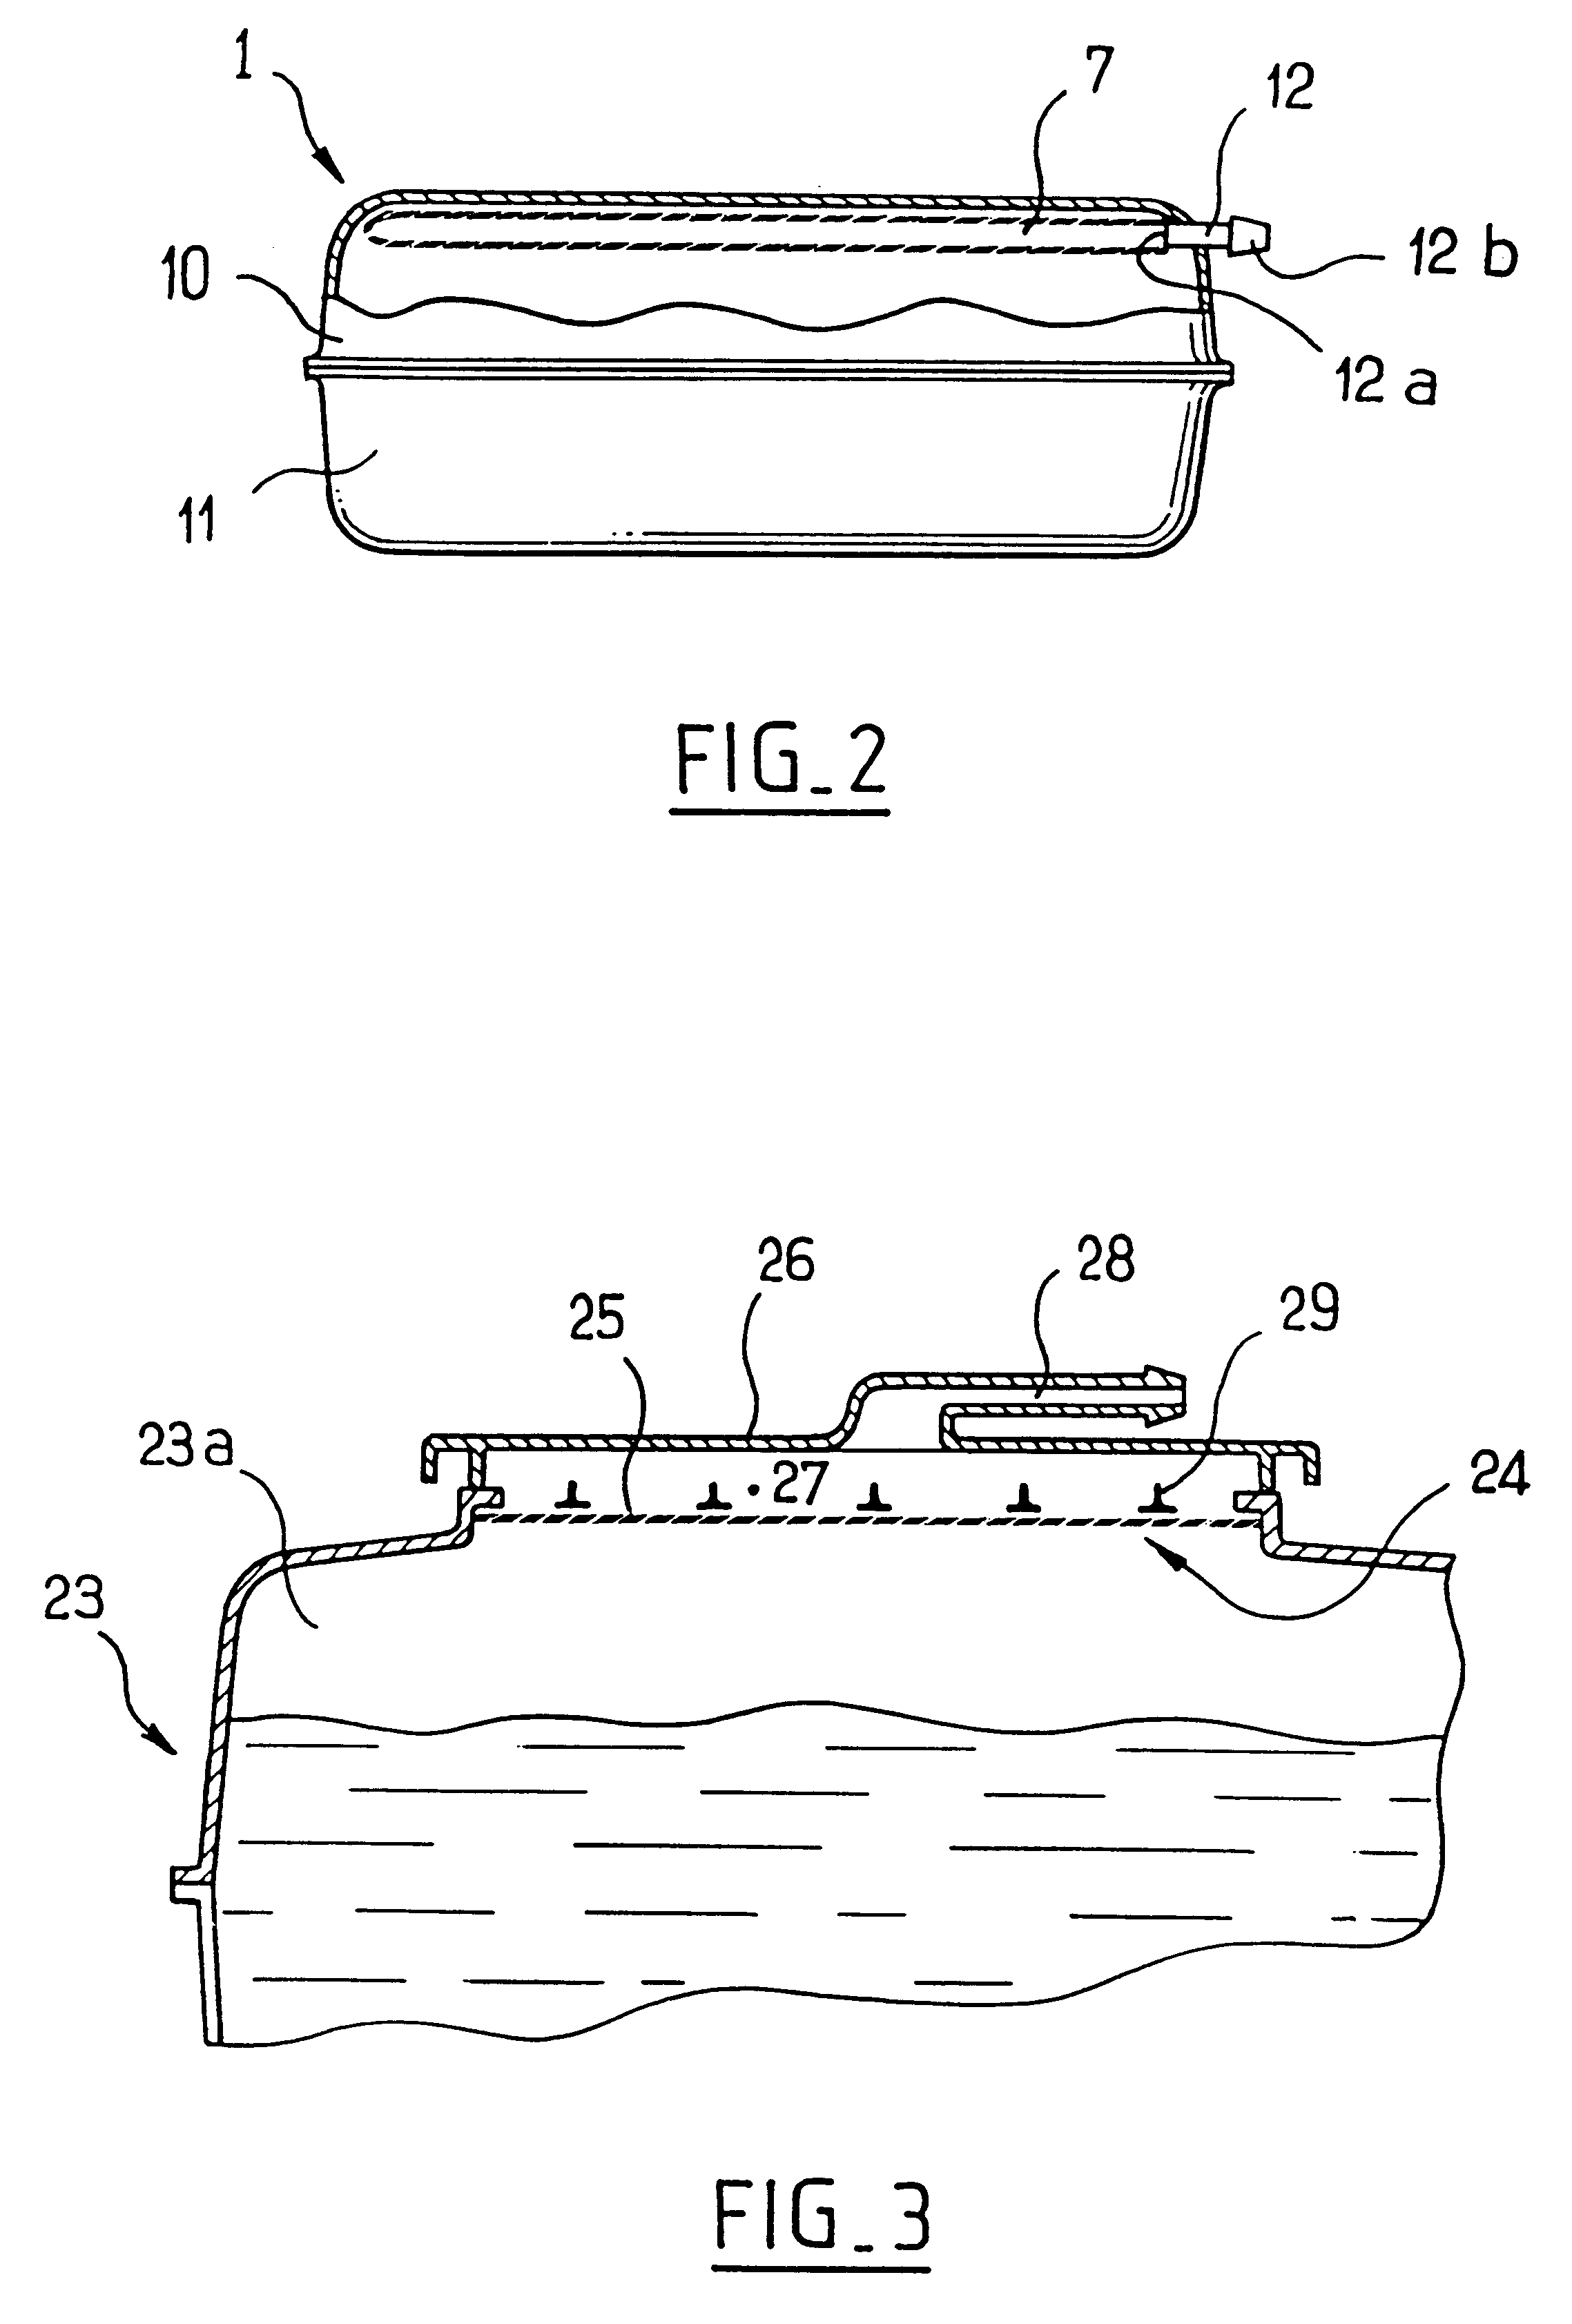 Fuel tank equipped with a gas evacuating system